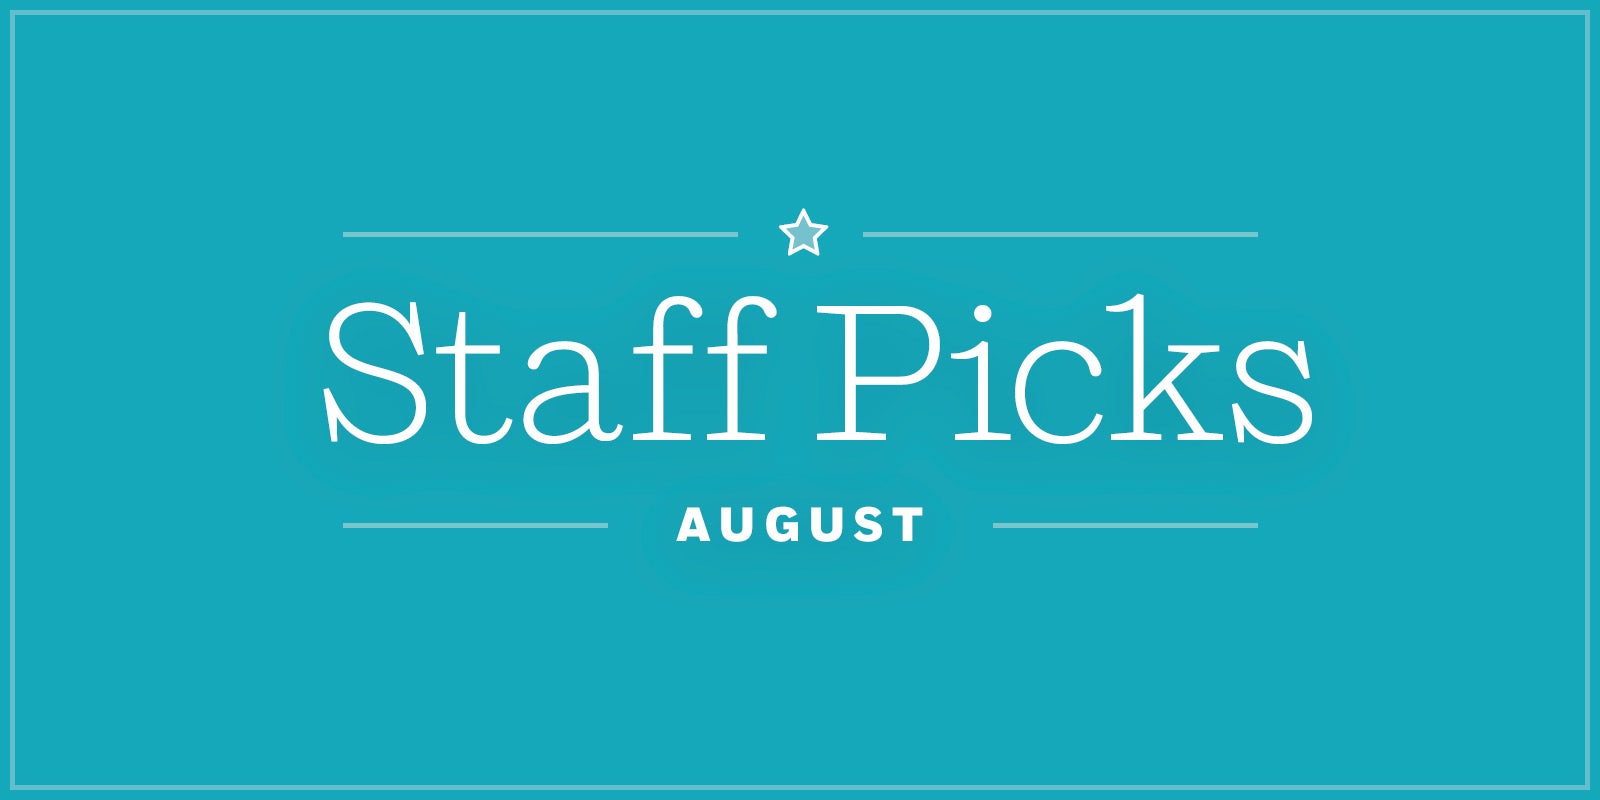 *Staff Picks for August*